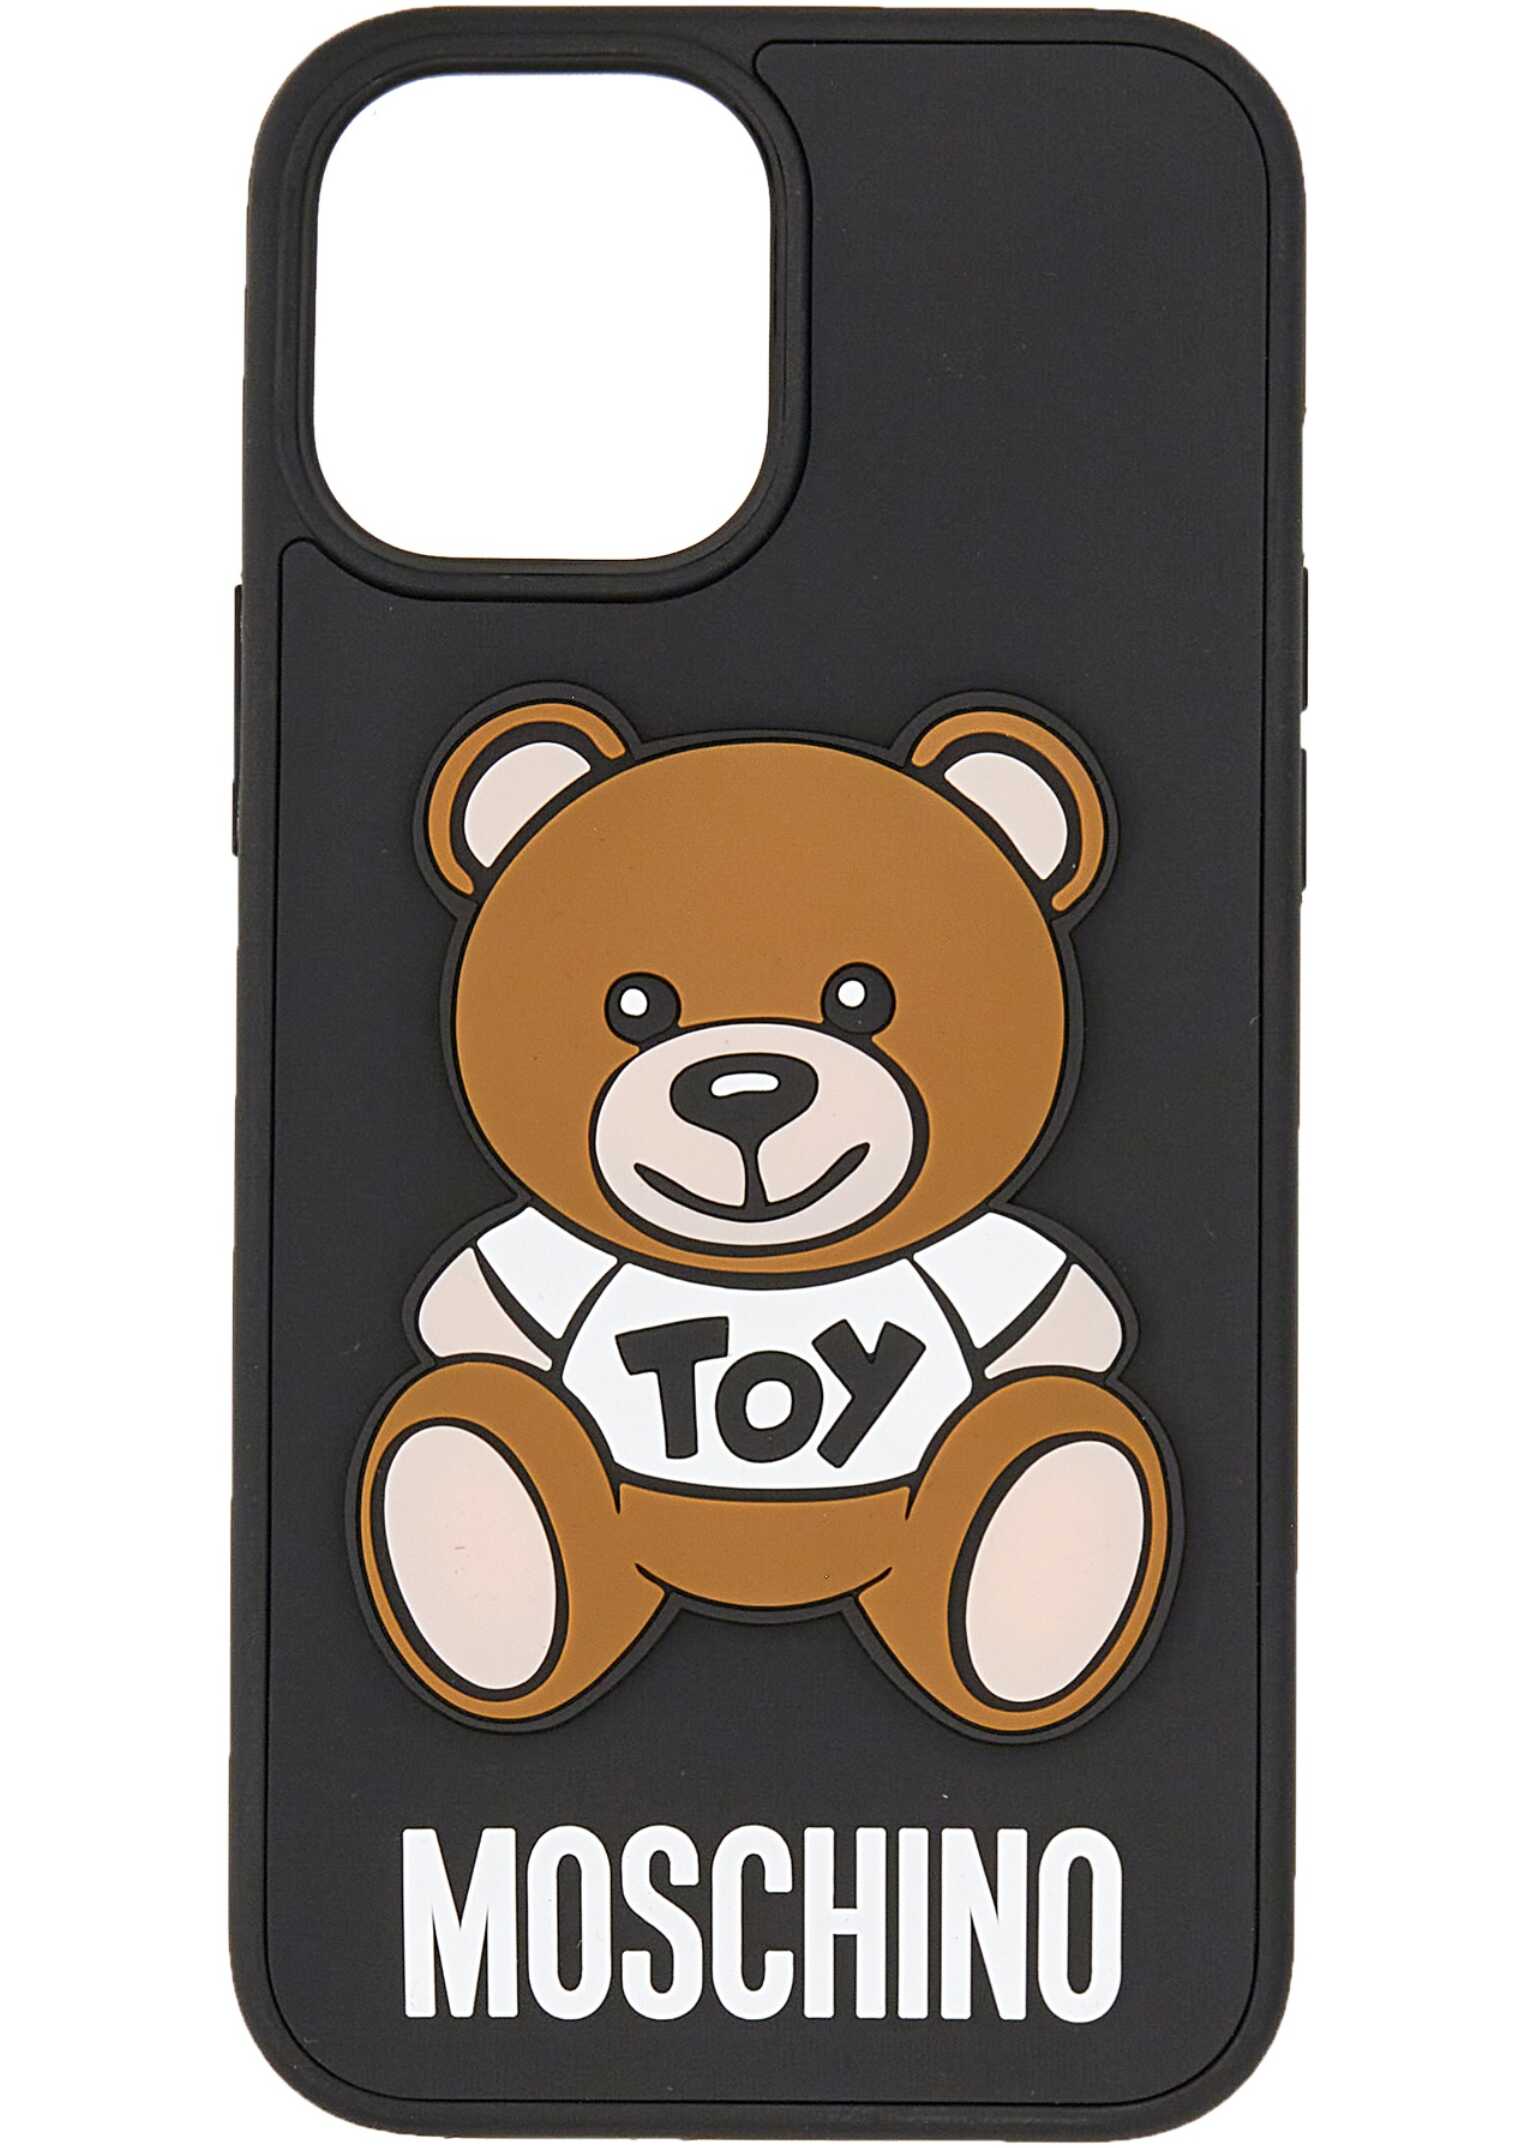 Moschino Case For Iphone 12 Pro Max BLACK